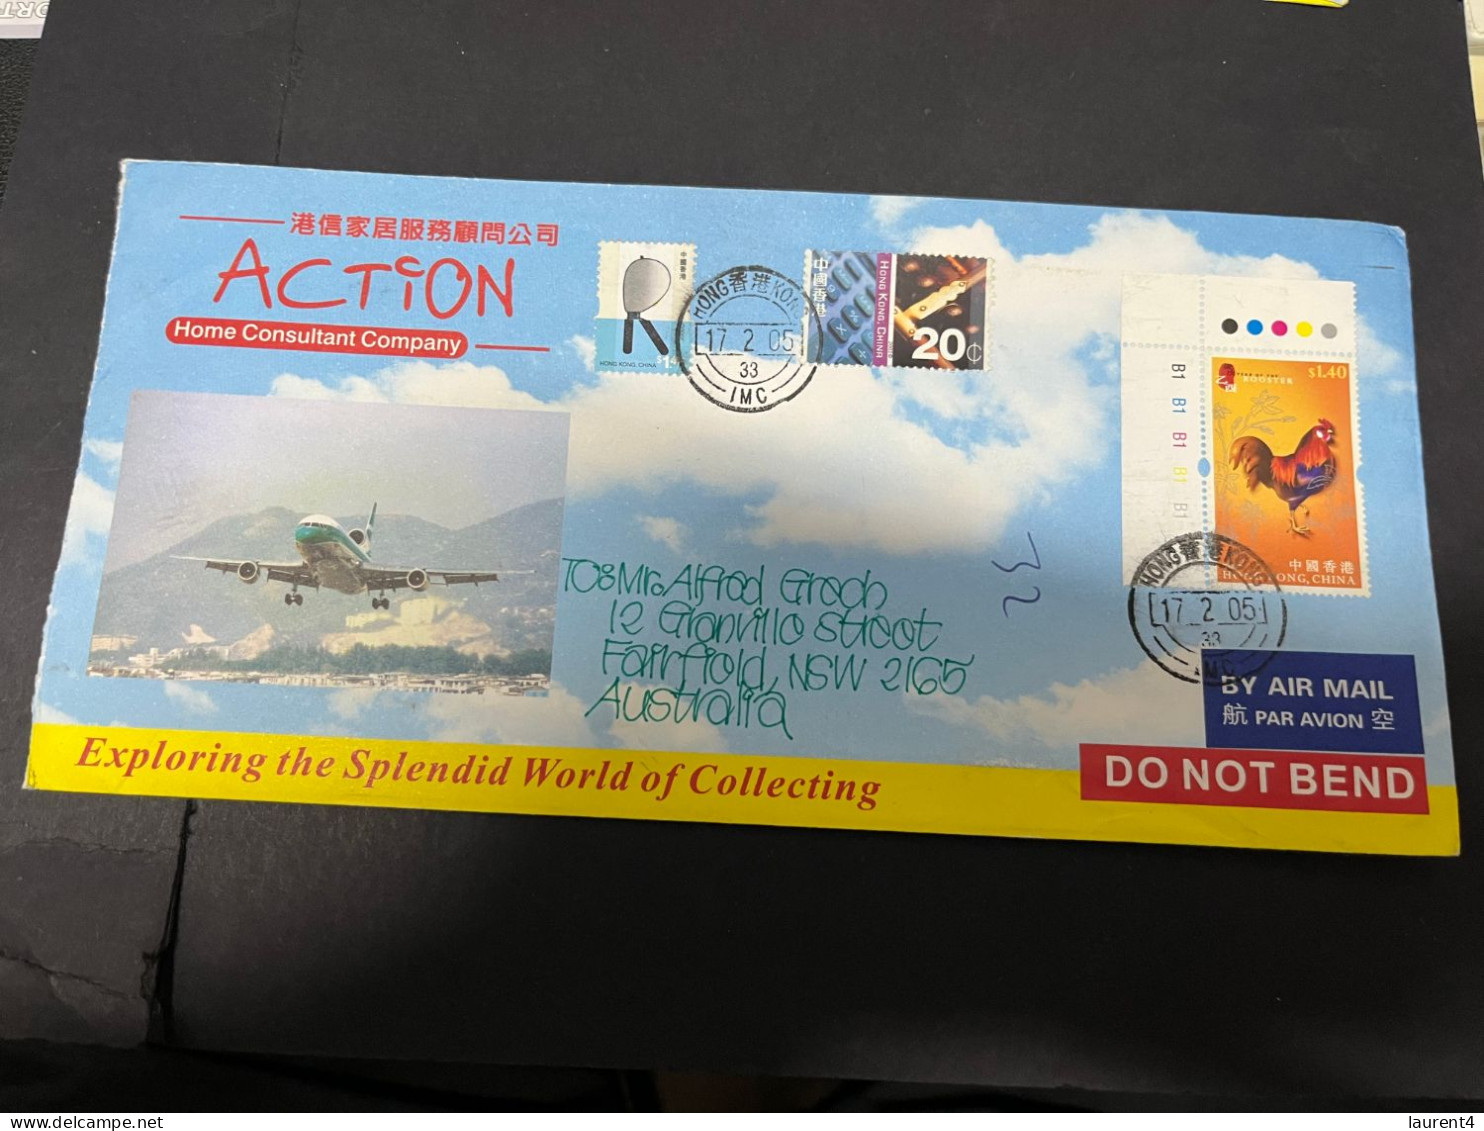 7-1-2024 (3 X 34) Cover Posted From Hong Kong To Australia - 2004 (with Numerous Stamps) CONCORDE Aircraft Back Of Cover - Covers & Documents